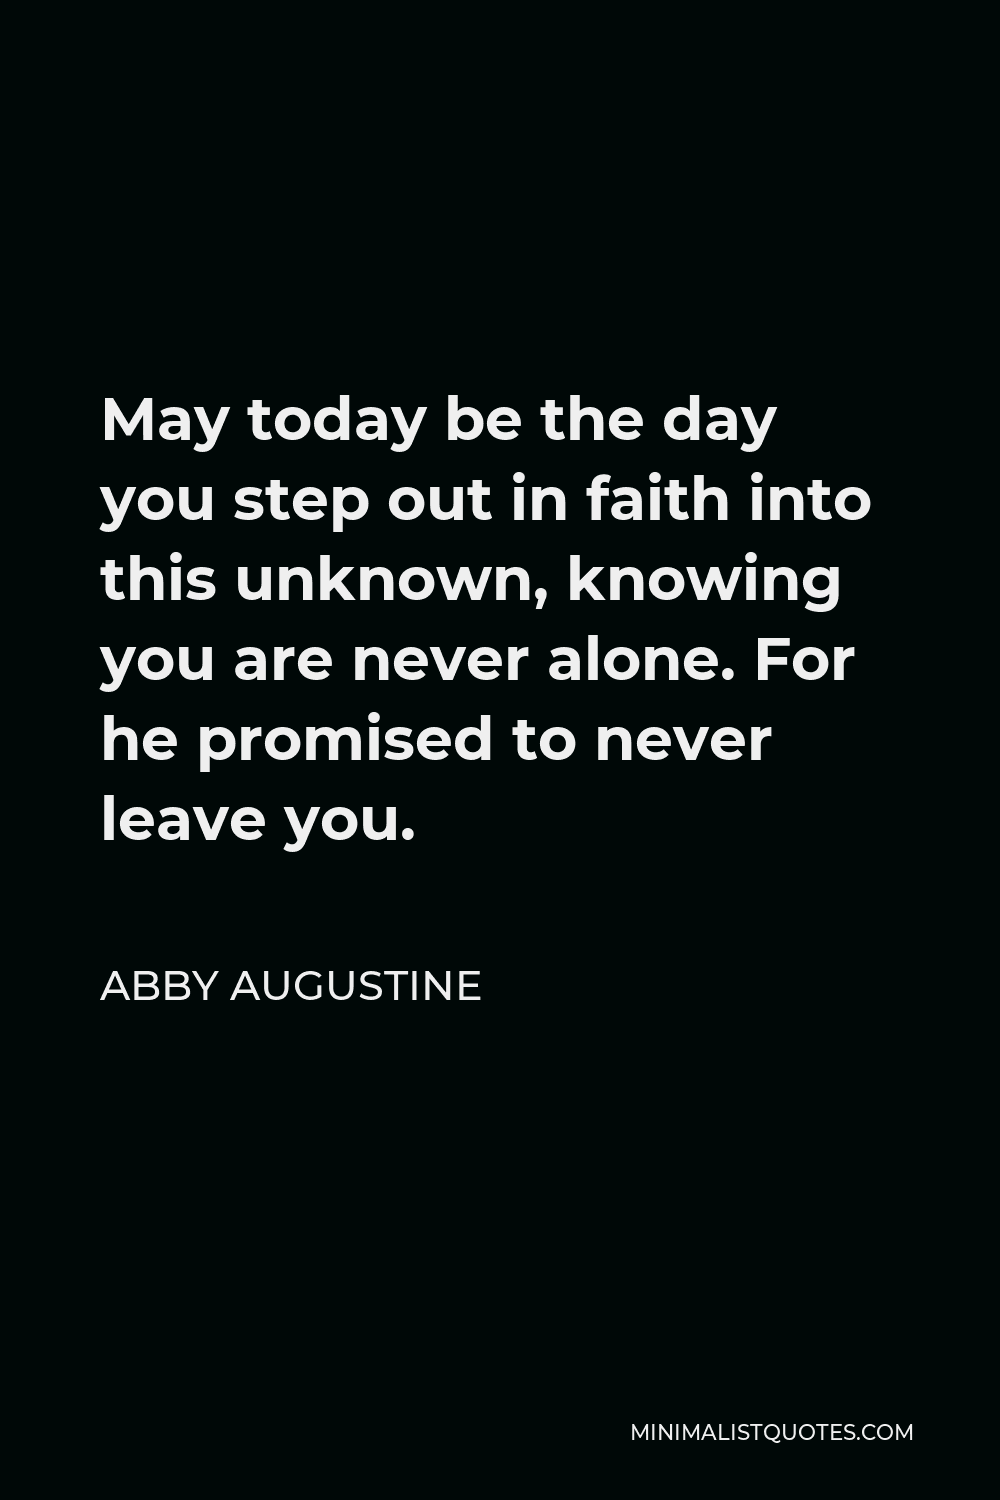 Abby Augustine Quote - May today be the day you step out in faith into this unknown, knowing you are never alone. For he promised to never leave you.